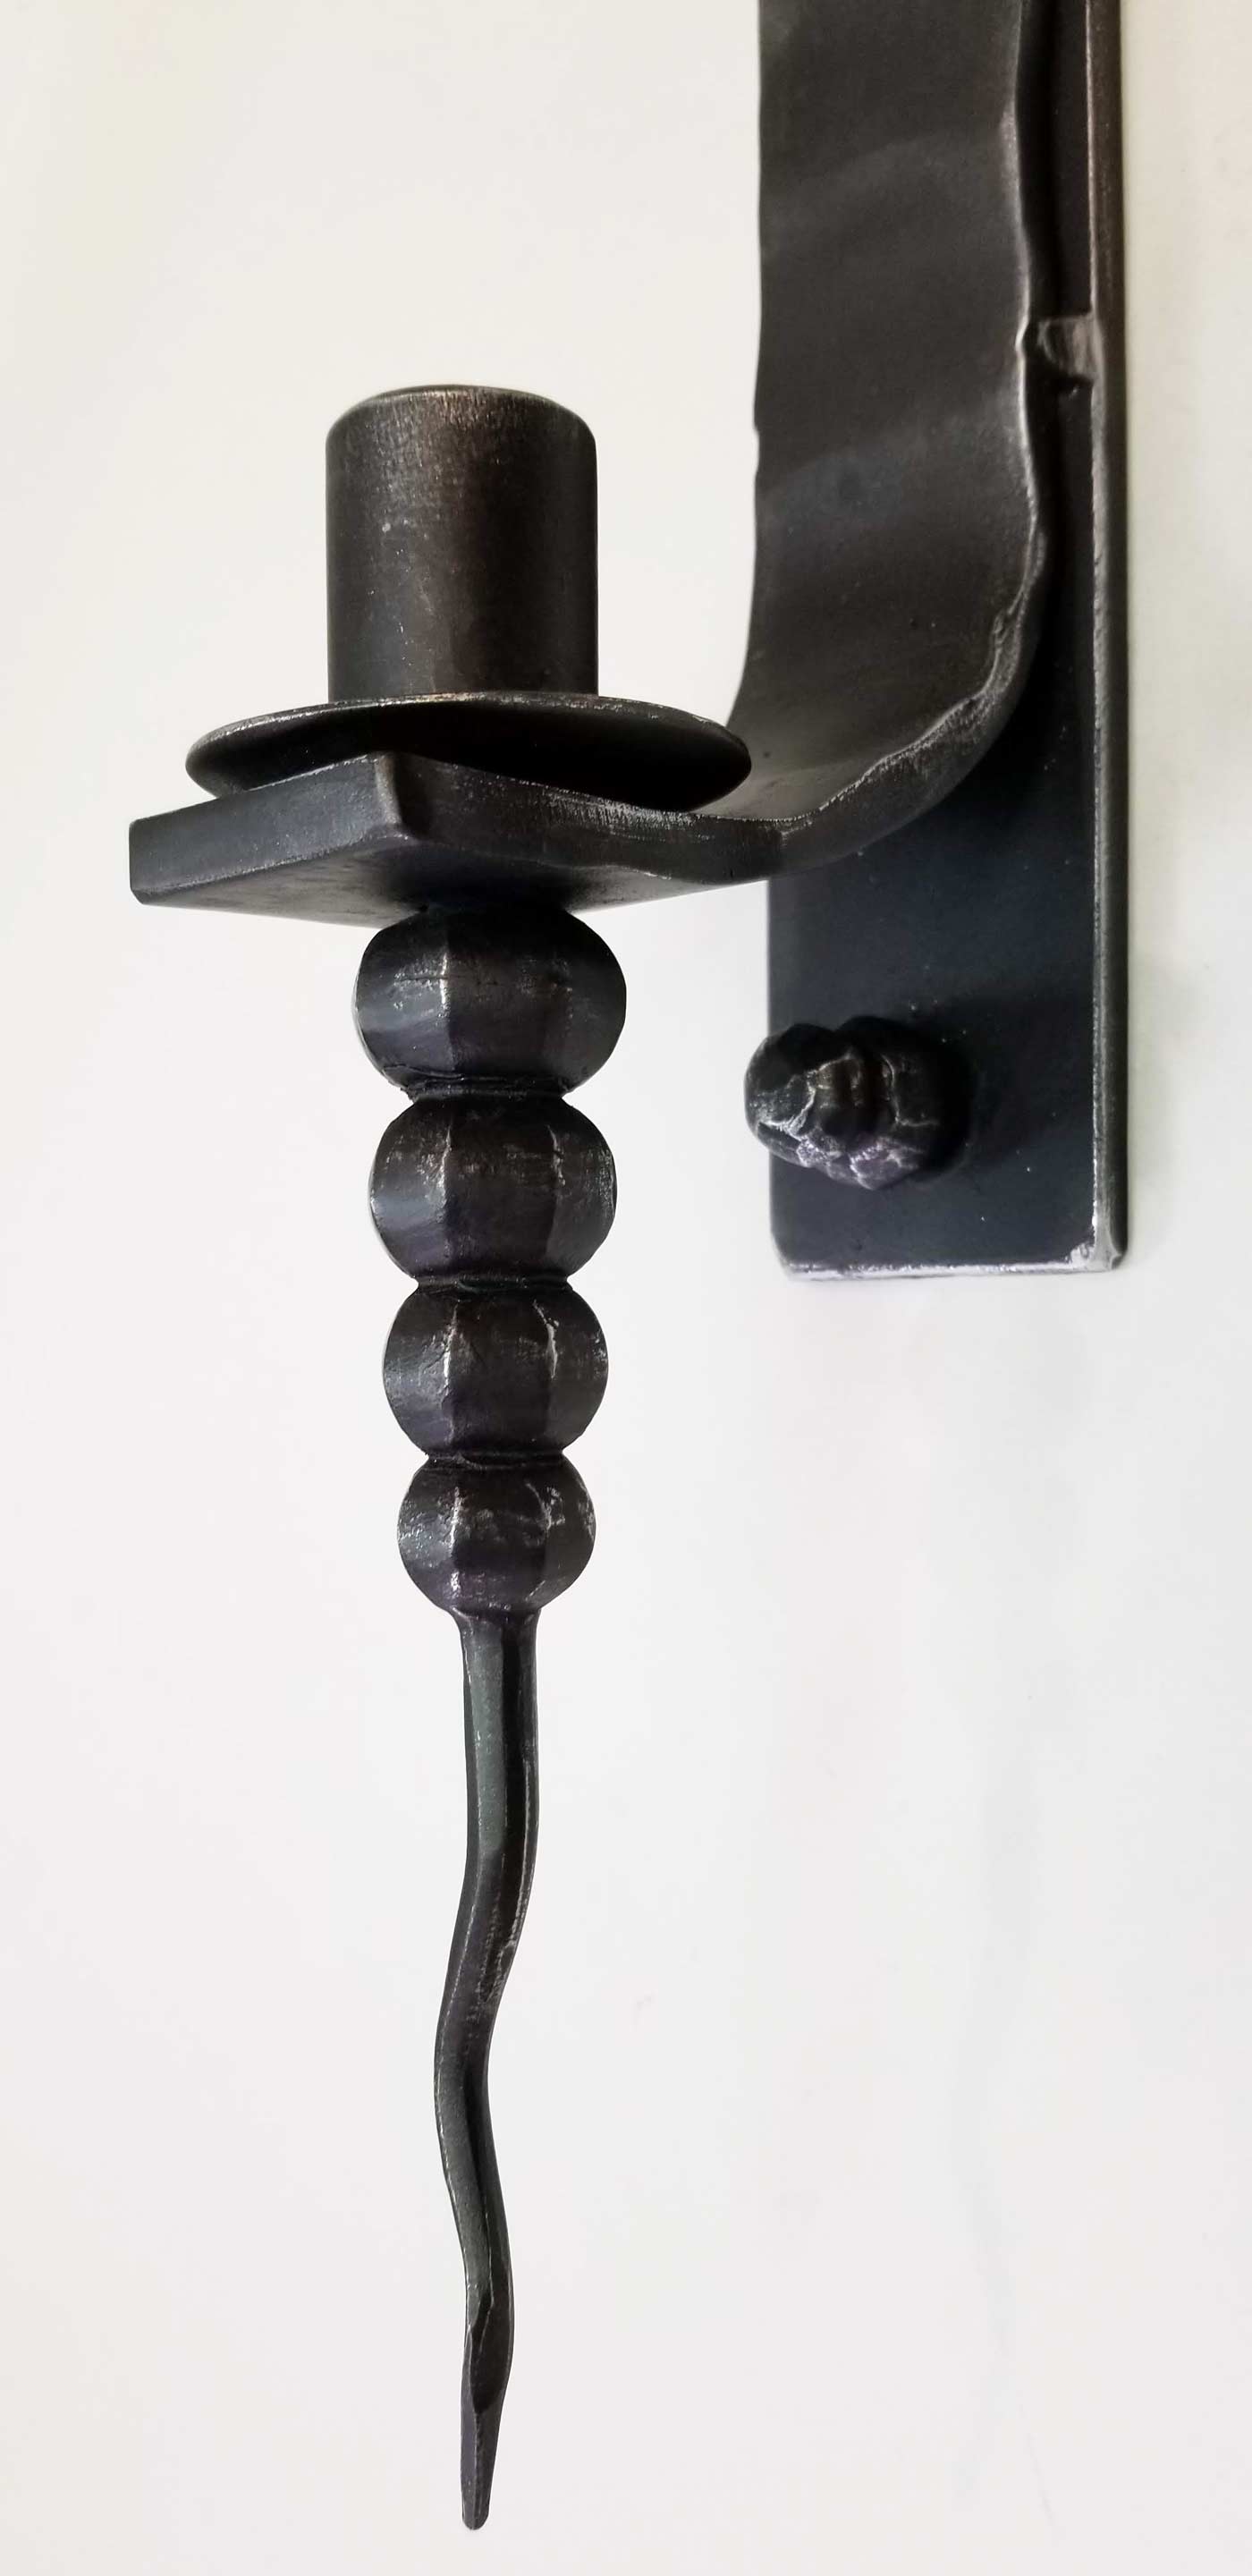 Wrought Iron Candle Sconce-It's Unique & Ideal for ... on Wrought Iron Wall Sconces id=30393